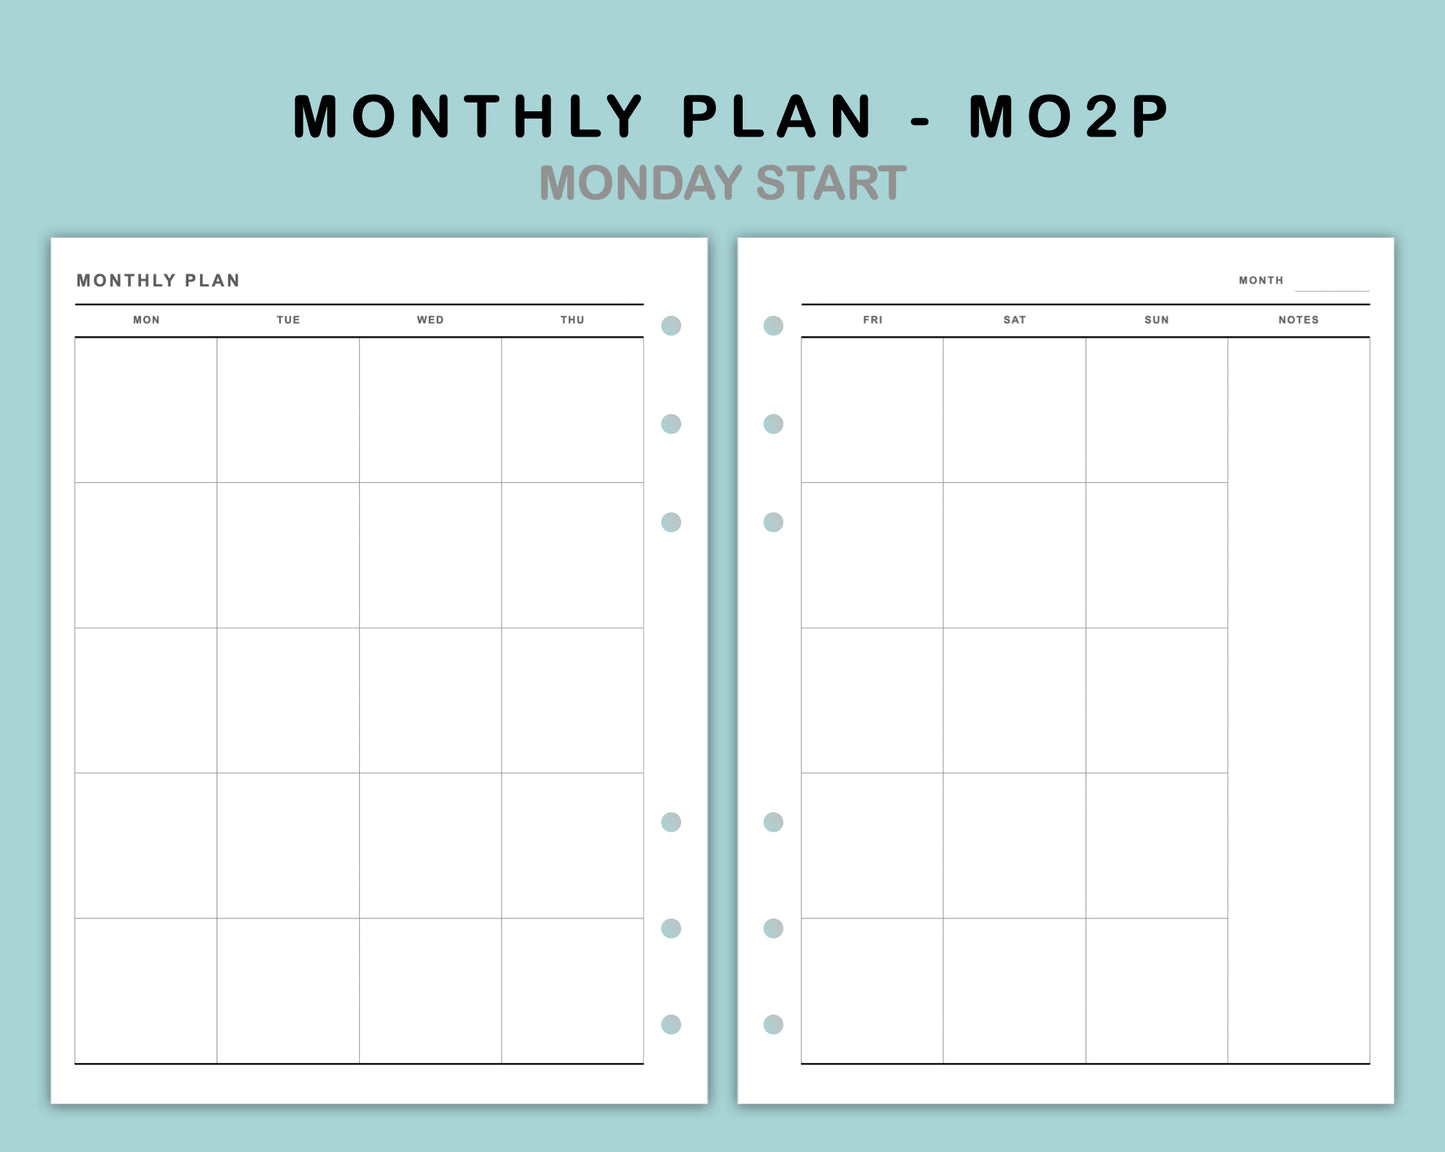 B6 Wide Inserts - Monthly Plan - MO2P